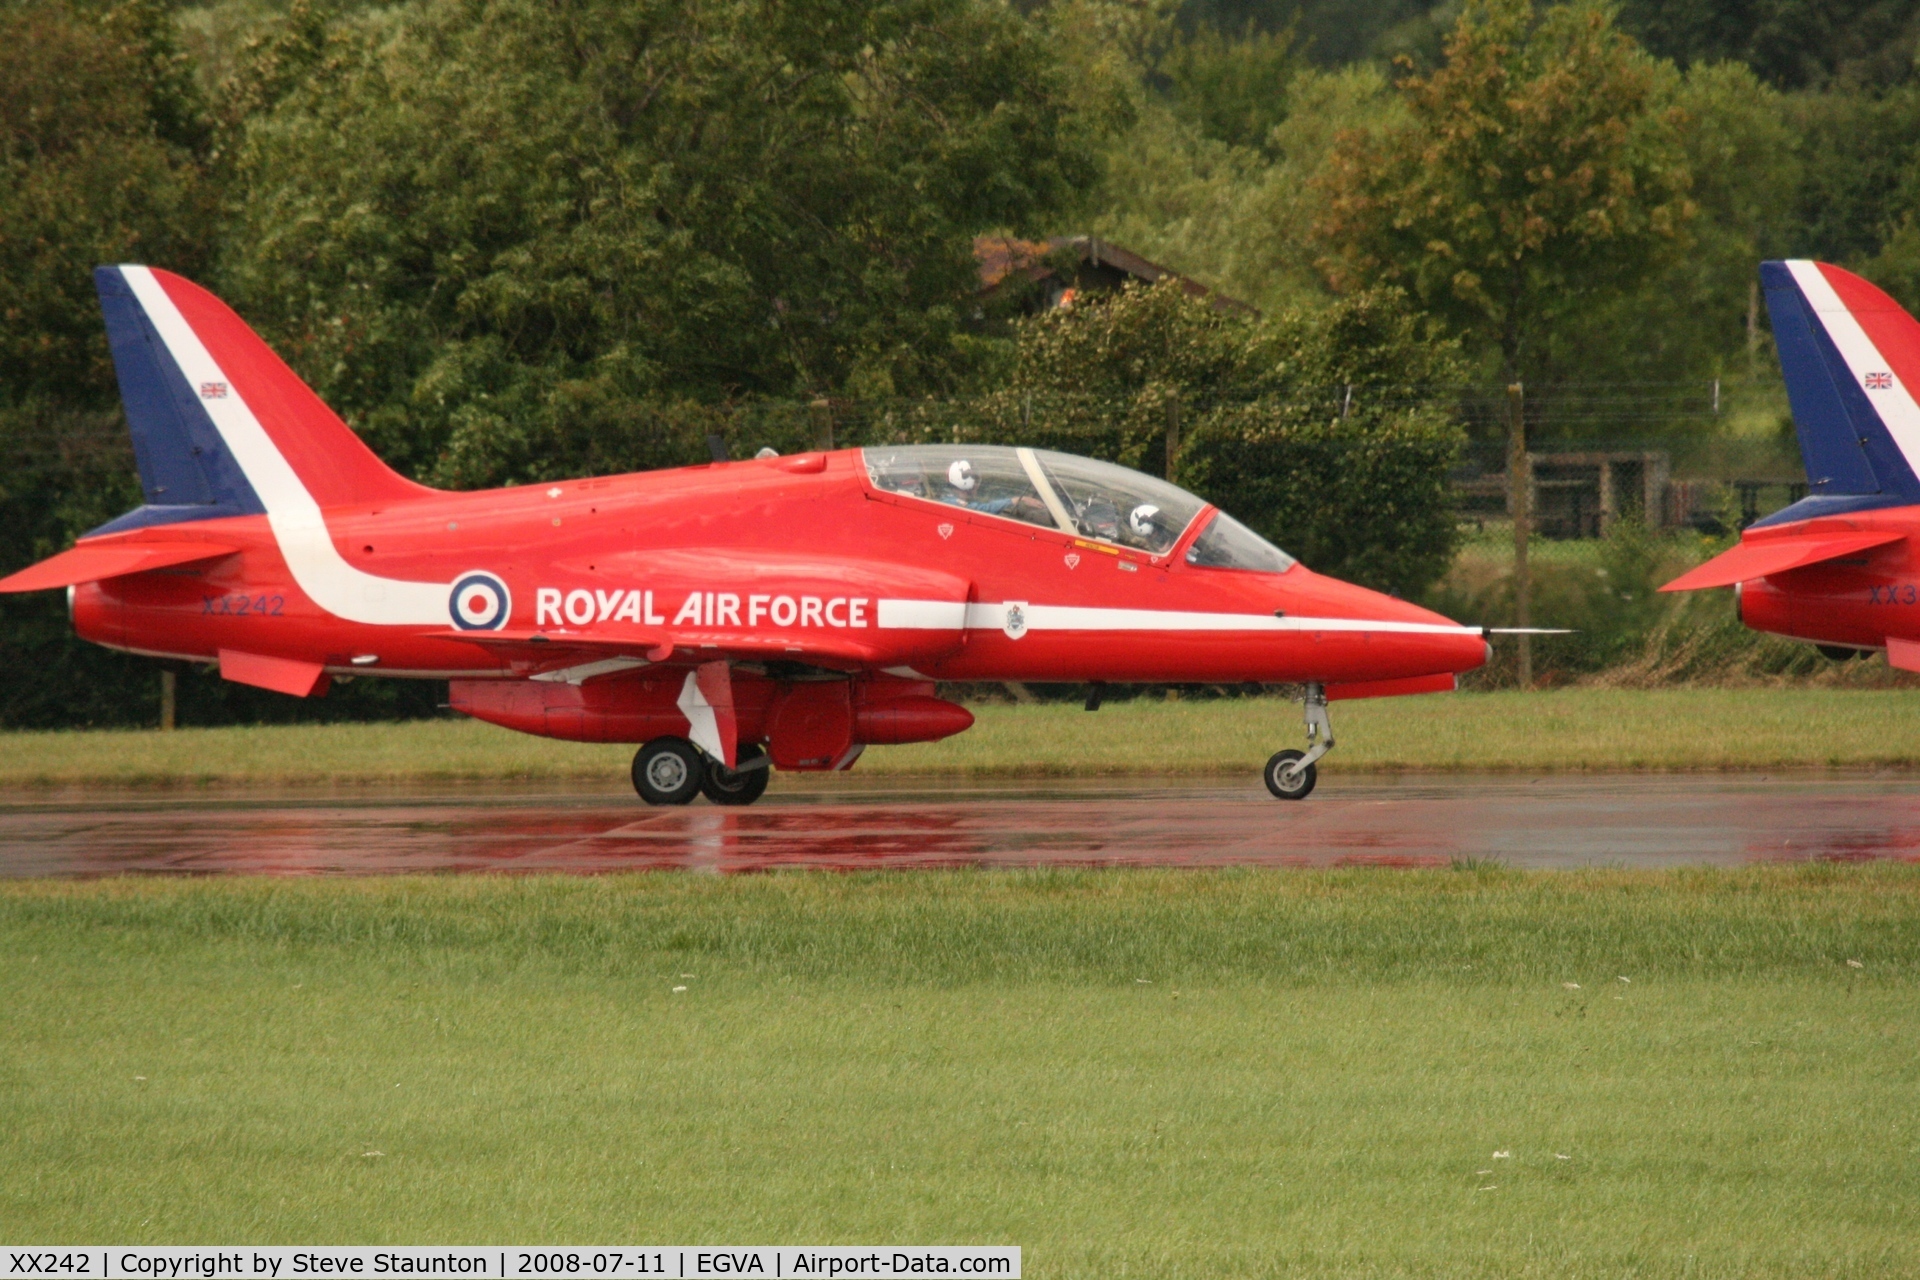 XX242, 1978 Hawker Siddeley Hawk T.1 C/N 078/312078, Taken at the Royal International Air Tattoo 2008 during arrivals and departures (show days cancelled due to bad weather)